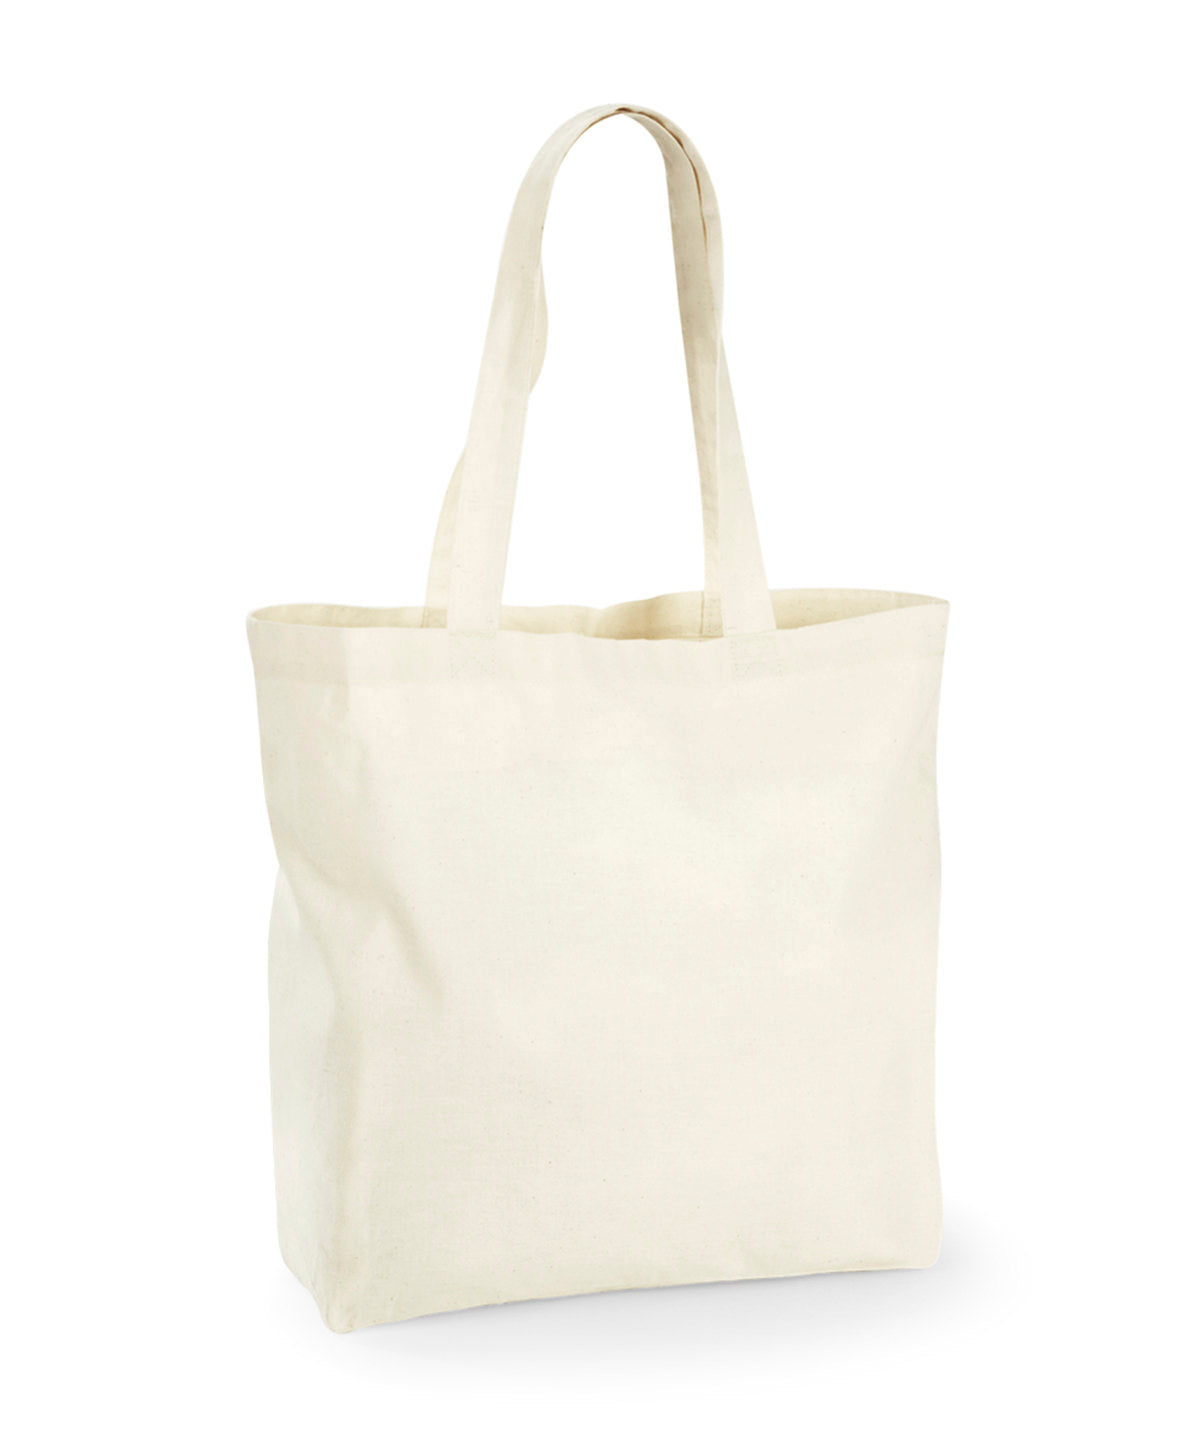 Recycled cotton maxi tote